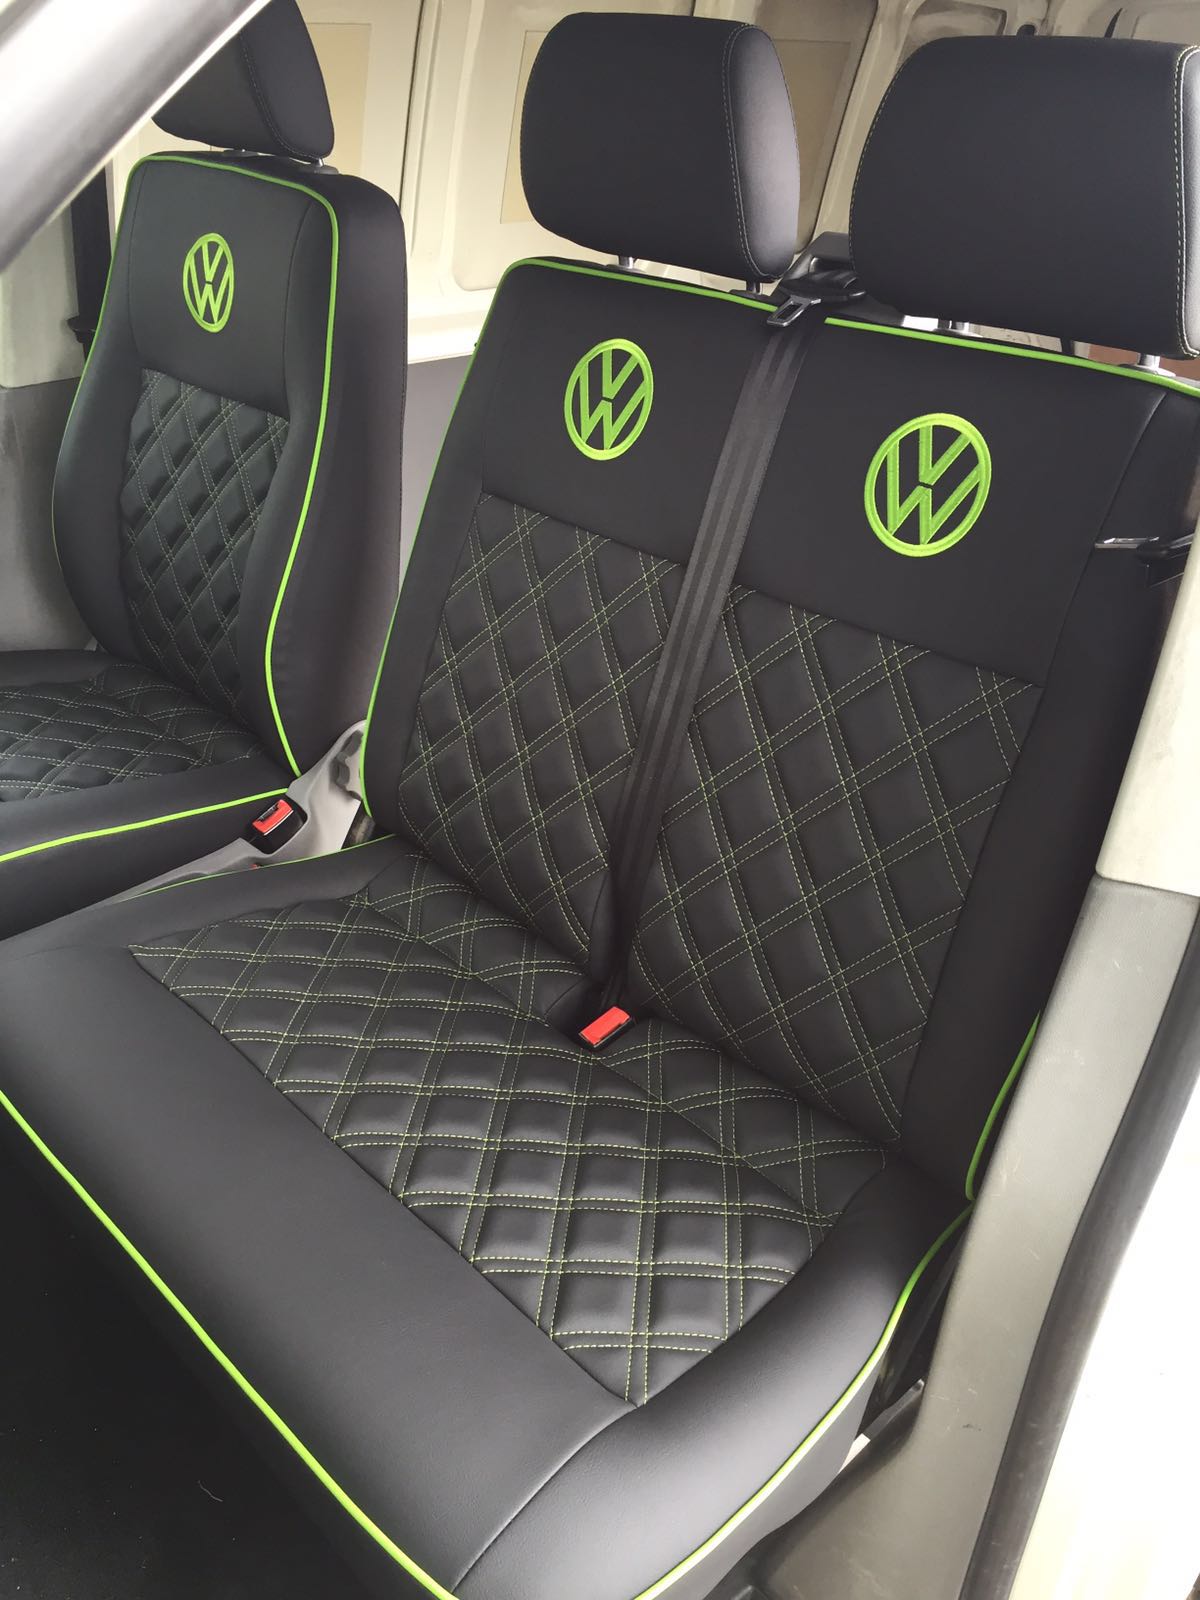 CSG Trimming Southampton. VW seats with bentley stich and green trim